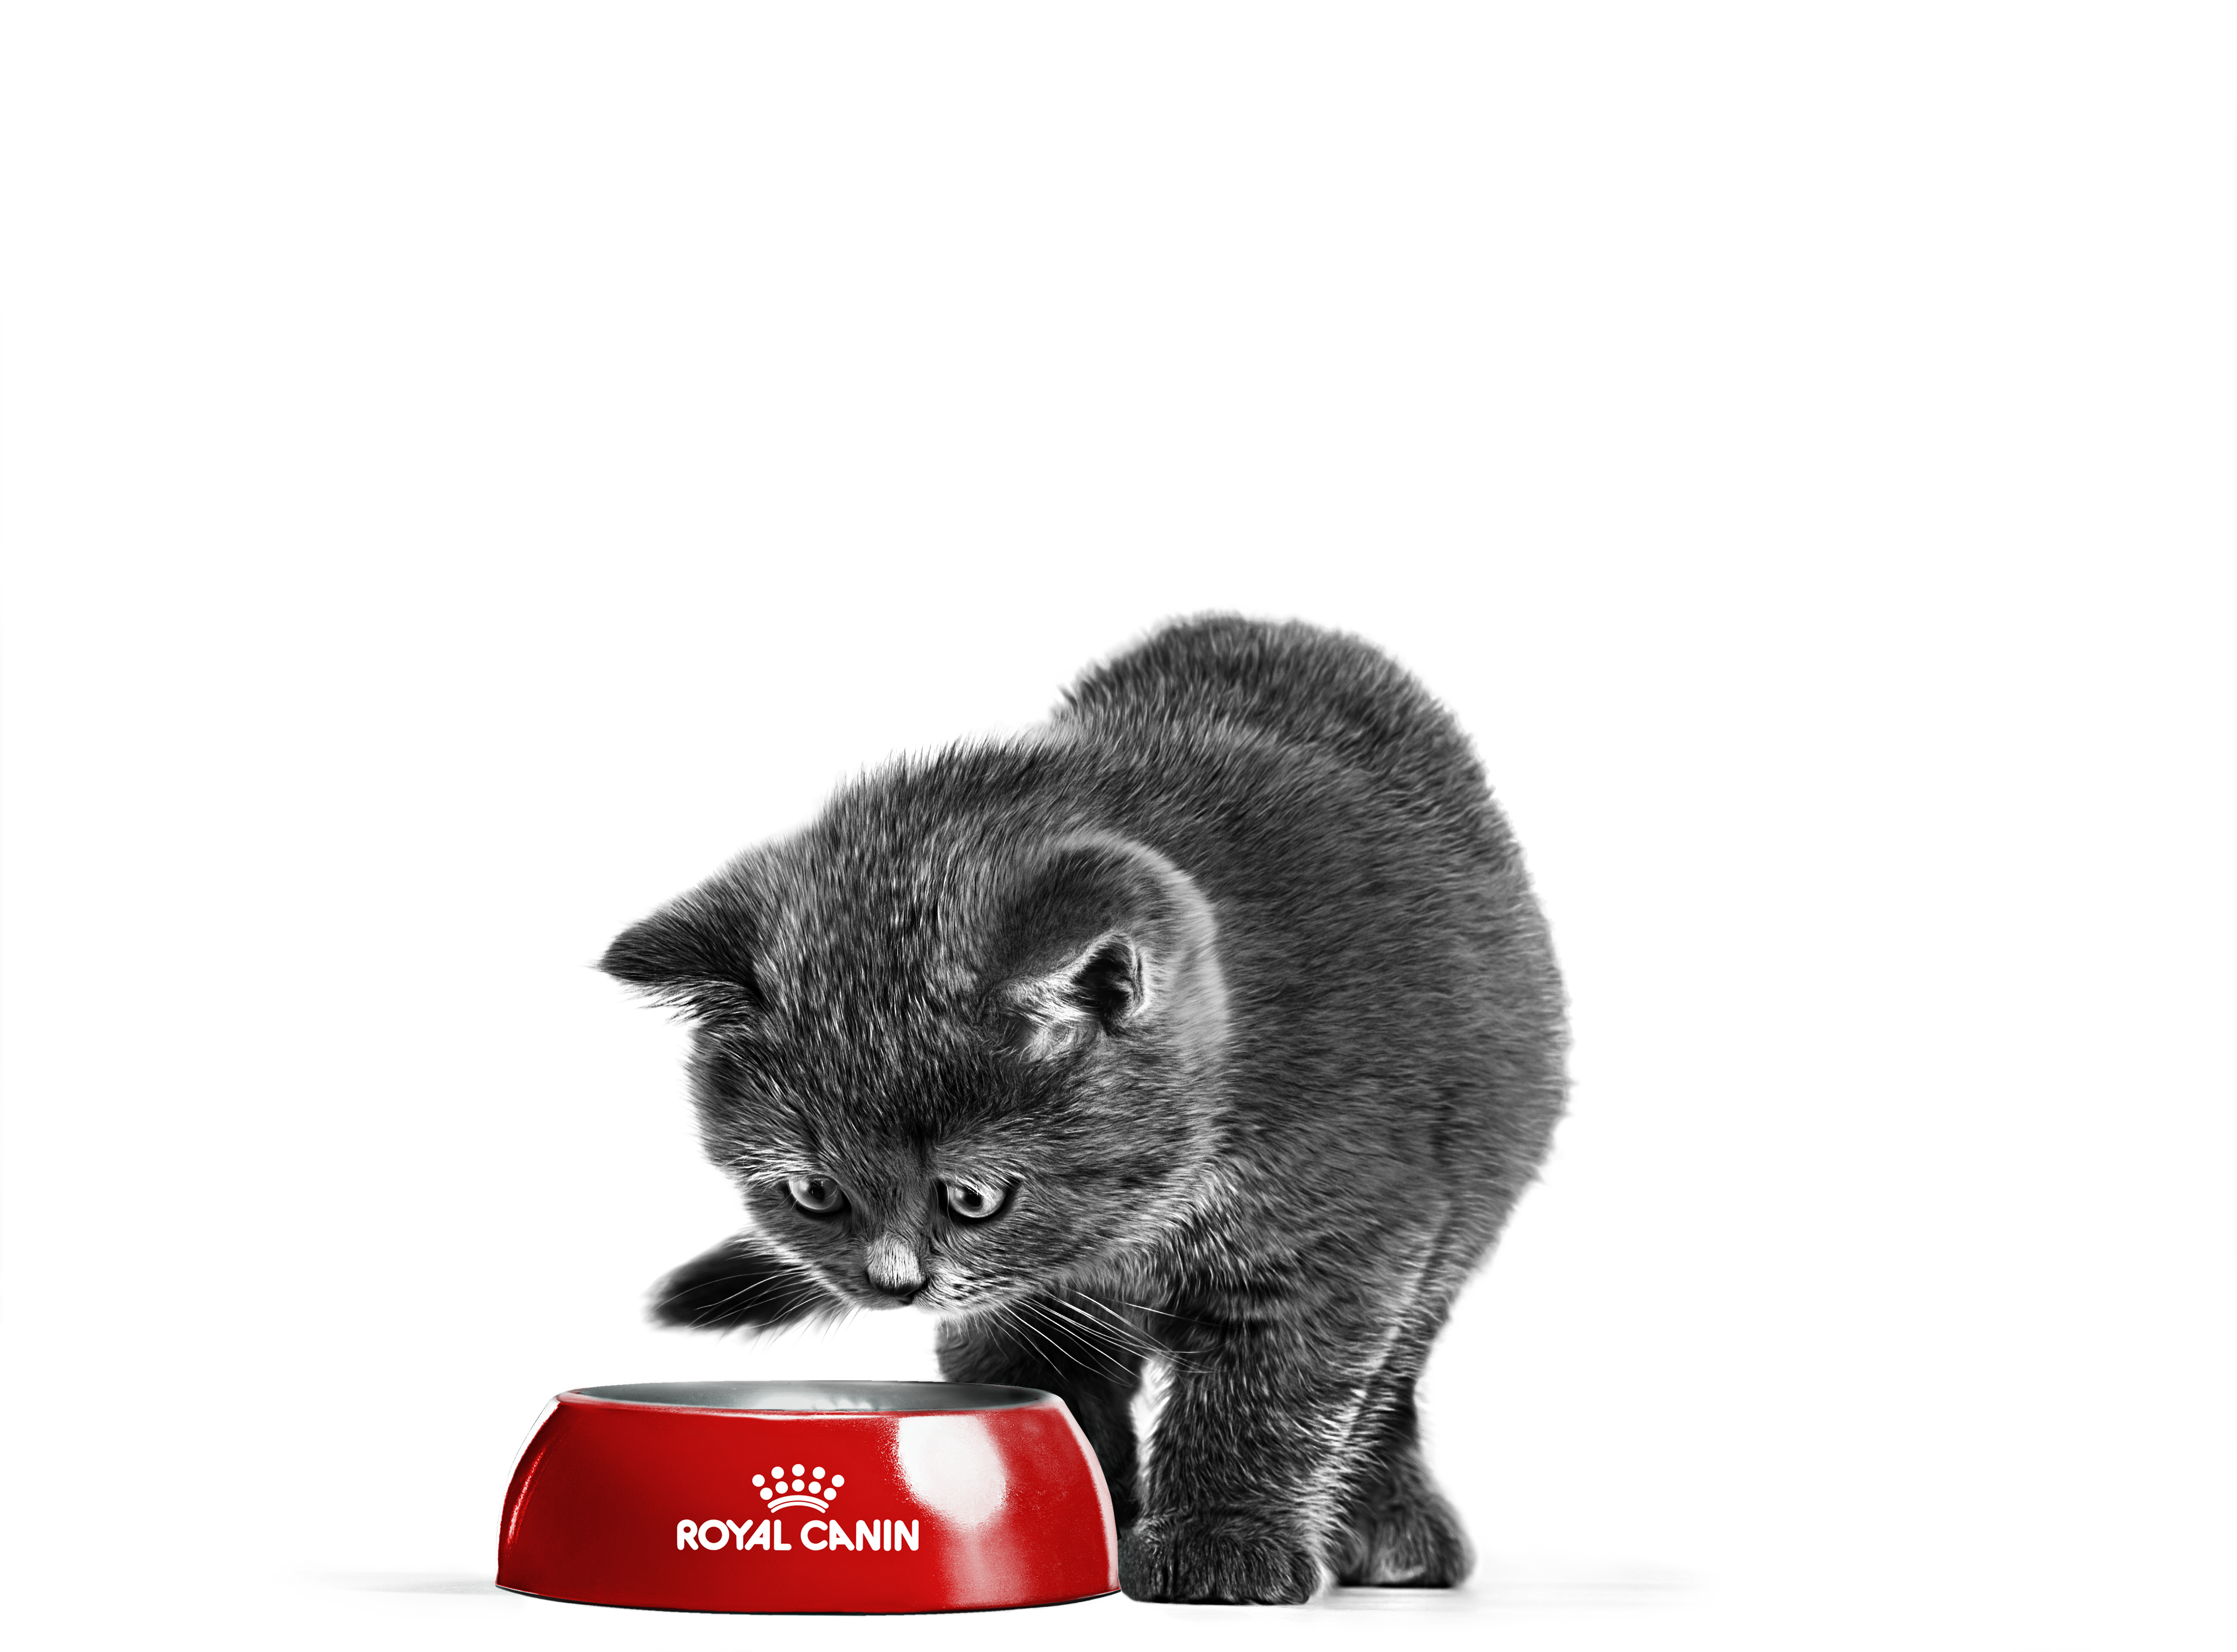 British Shorthair kitten in black and white eating from a red bowl